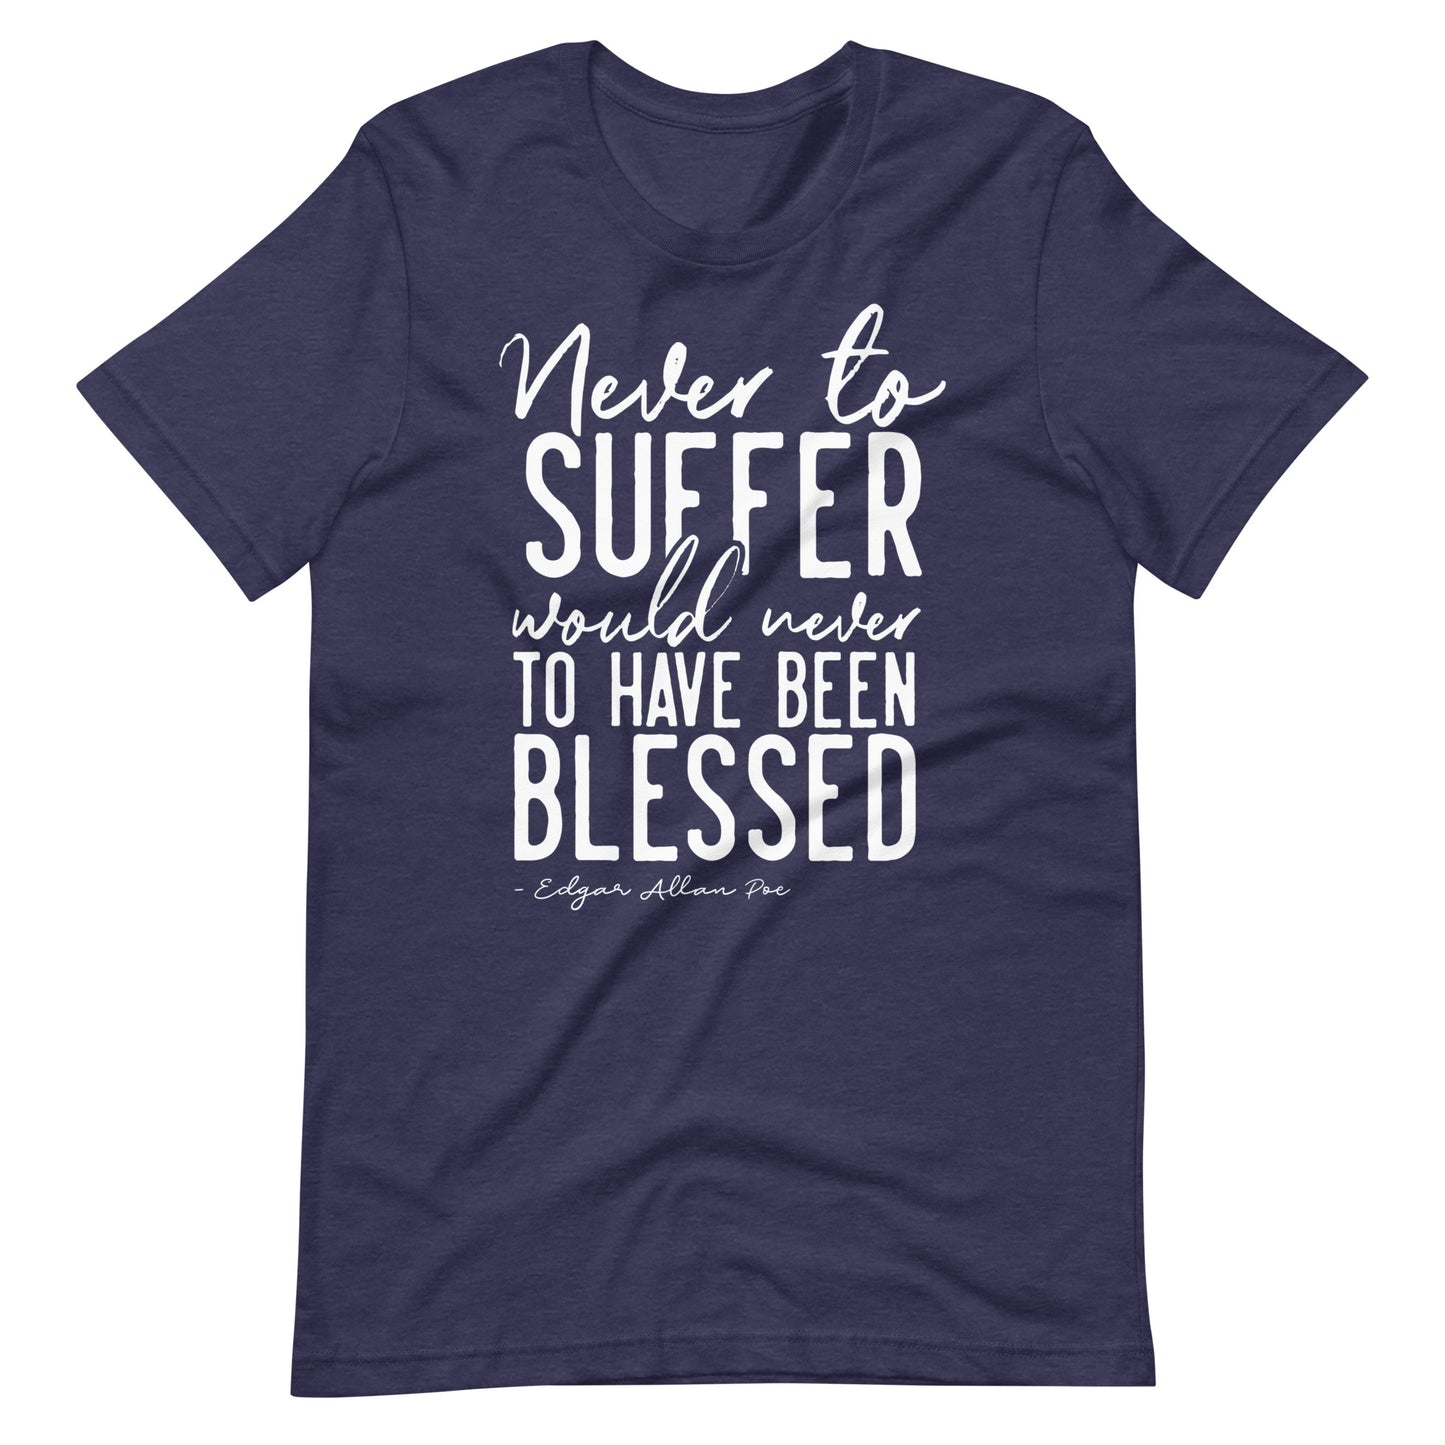 Never to Suffer Edgar Allan Poe Quote - Men's t-shirt - Heather Midnight Navy Front